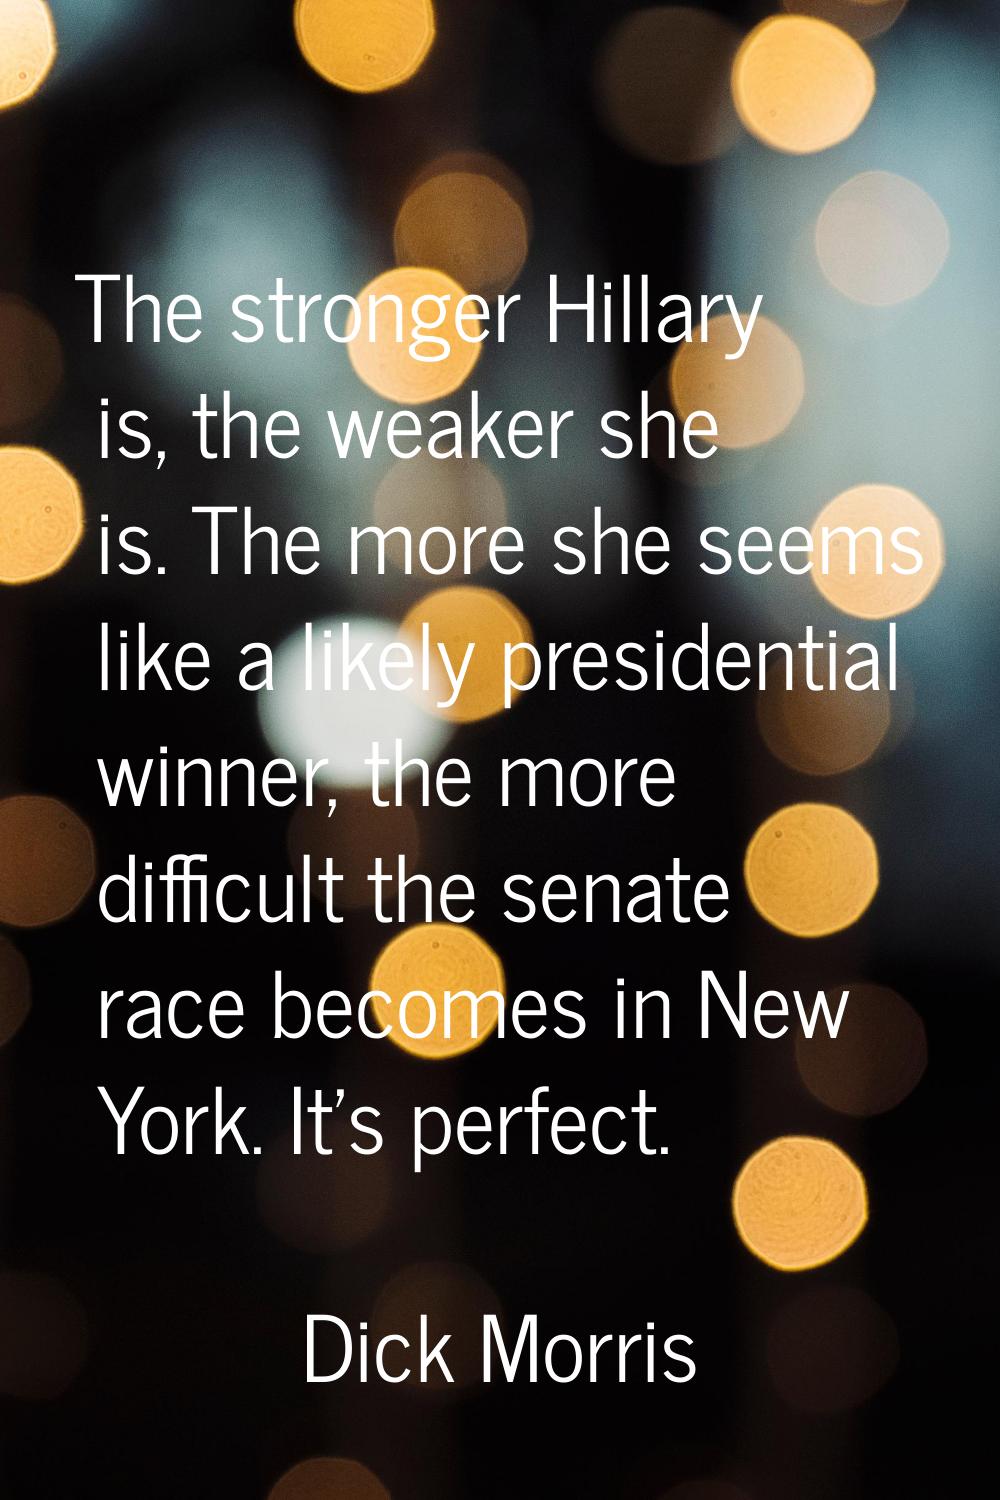 The stronger Hillary is, the weaker she is. The more she seems like a likely presidential winner, t